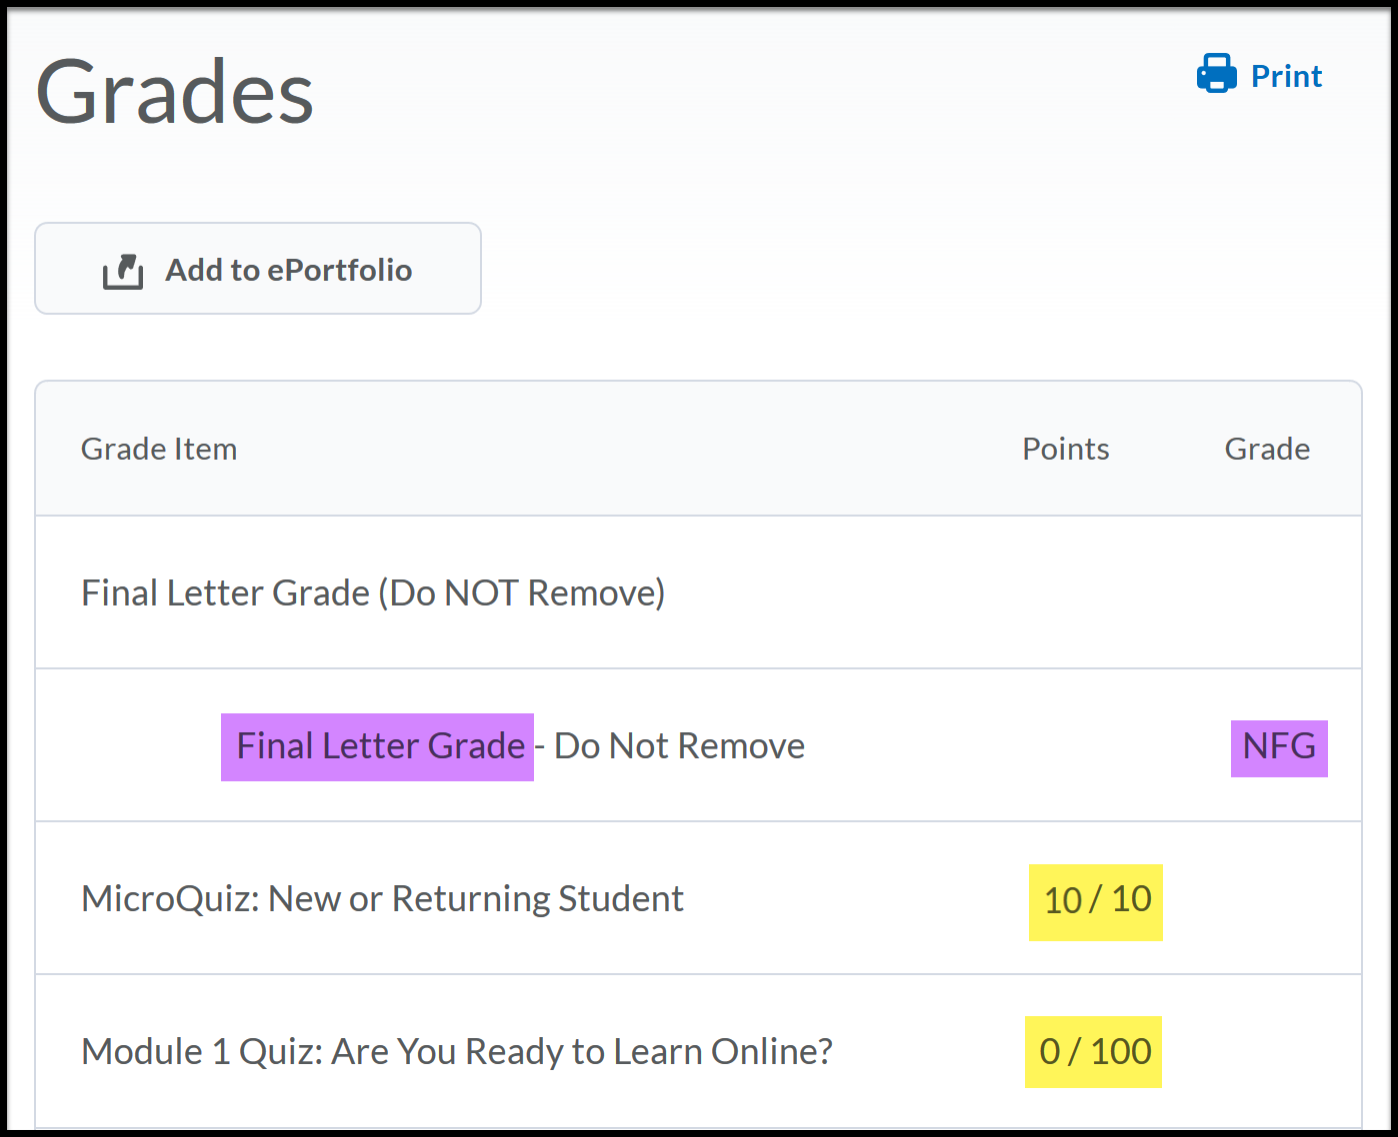 Sample Grades page opens Final Letter Grade and Module 1 quiz are highlighted.